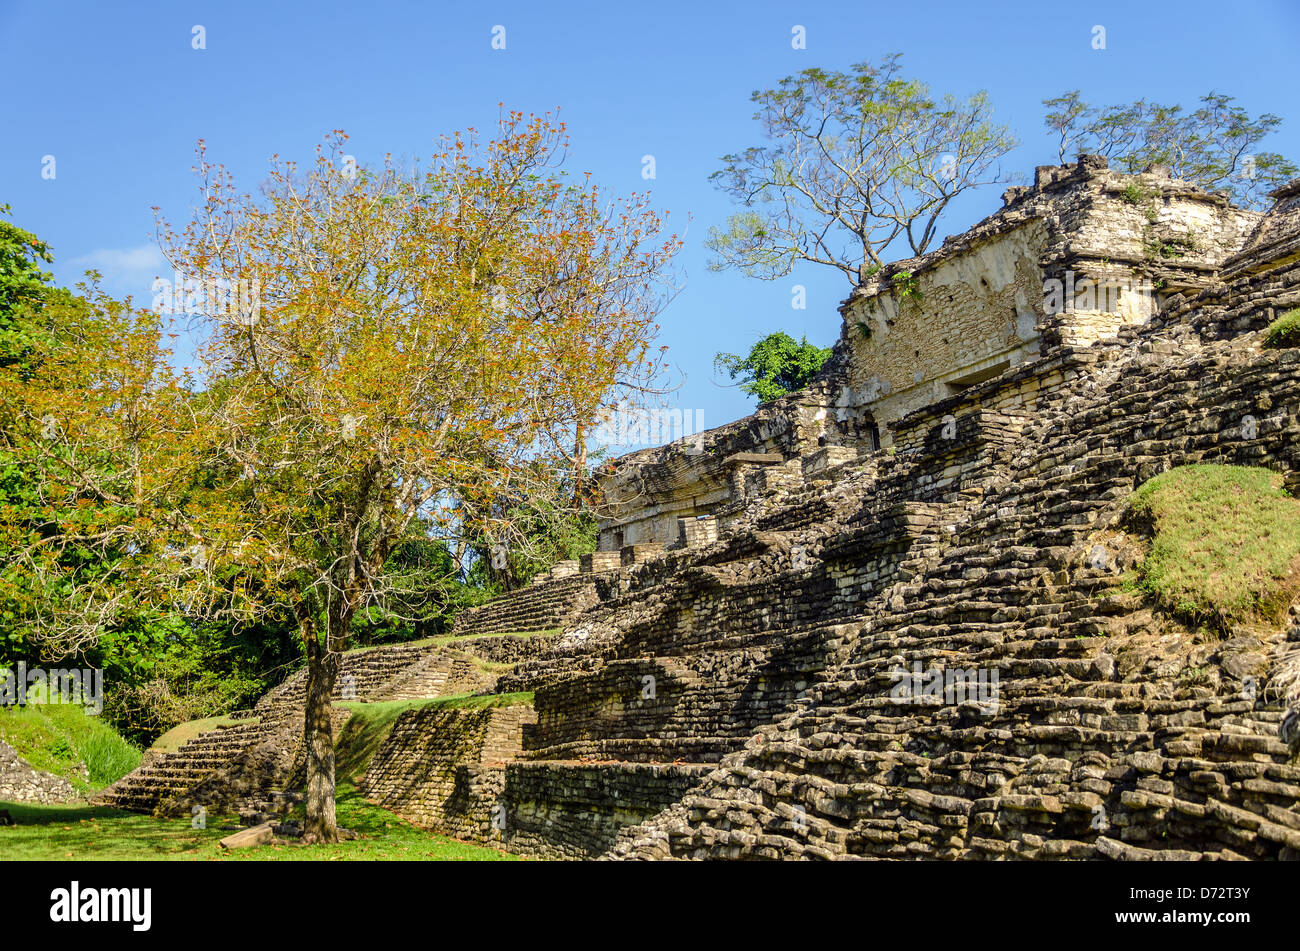 Ruined temple in the ancient Mayan city of Palenque in Mexico Stock Photo